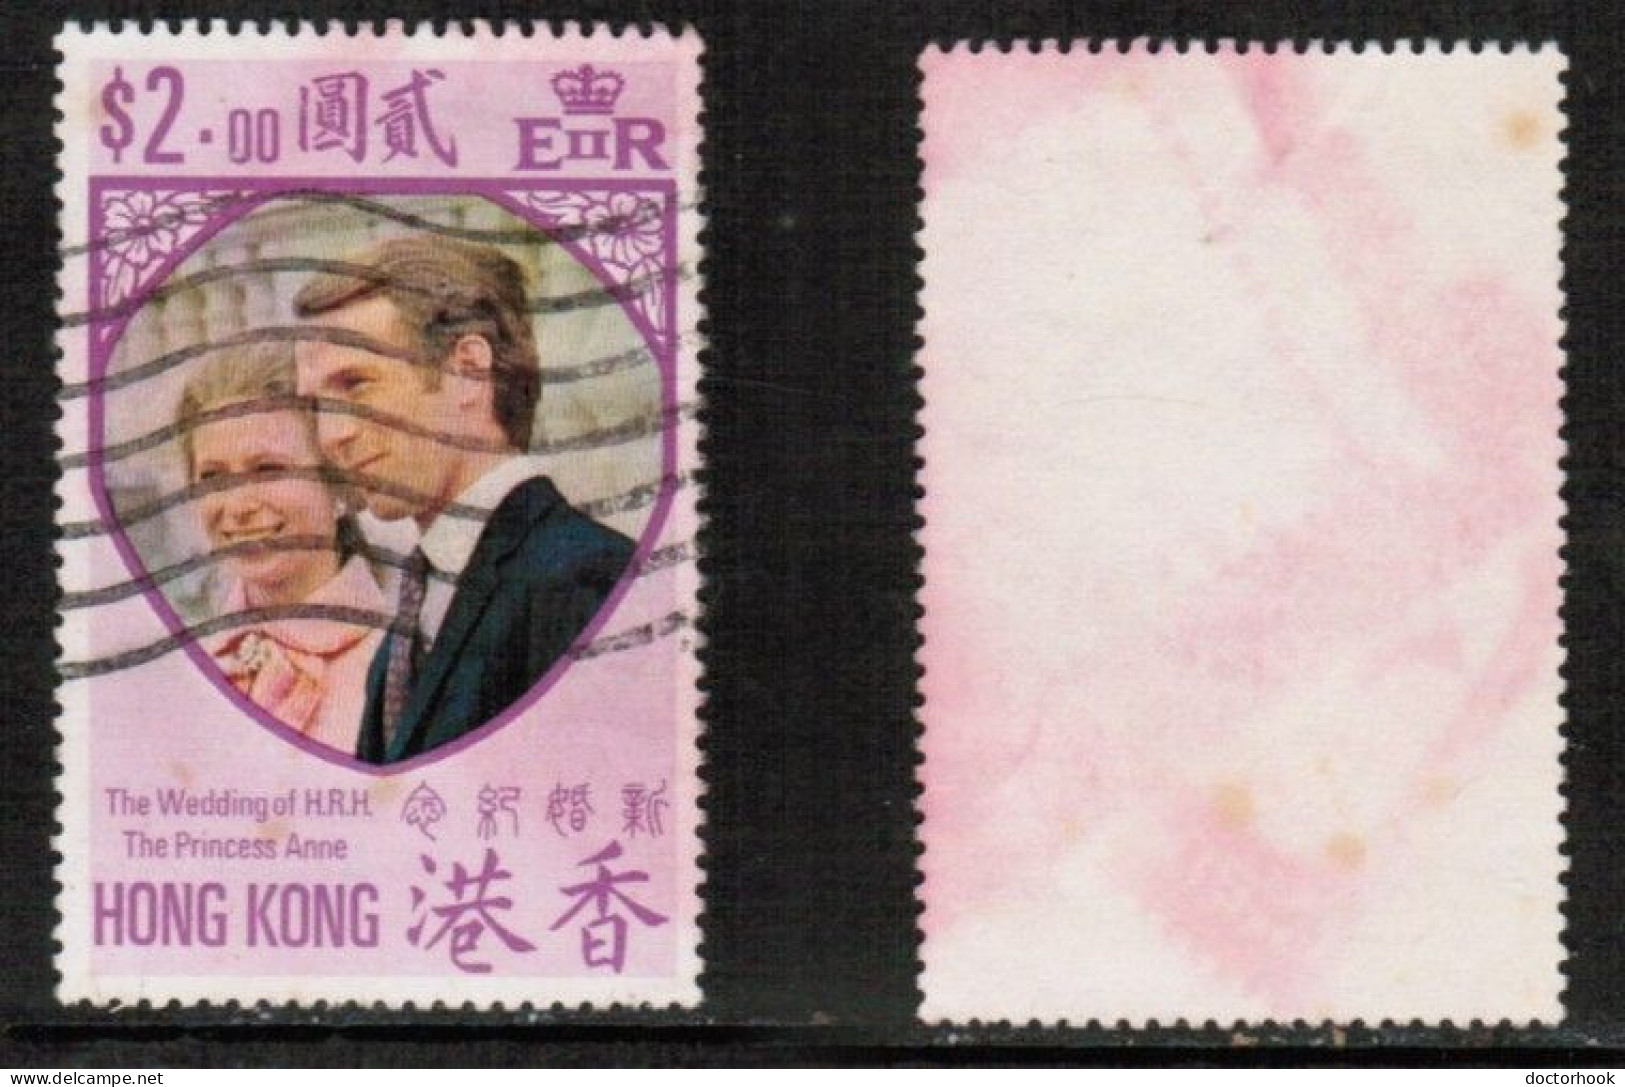 HONG KONG   Scott # 290 USED (CONDITION AS PER SCAN) (Stamp Scan # 931-1) - Oblitérés